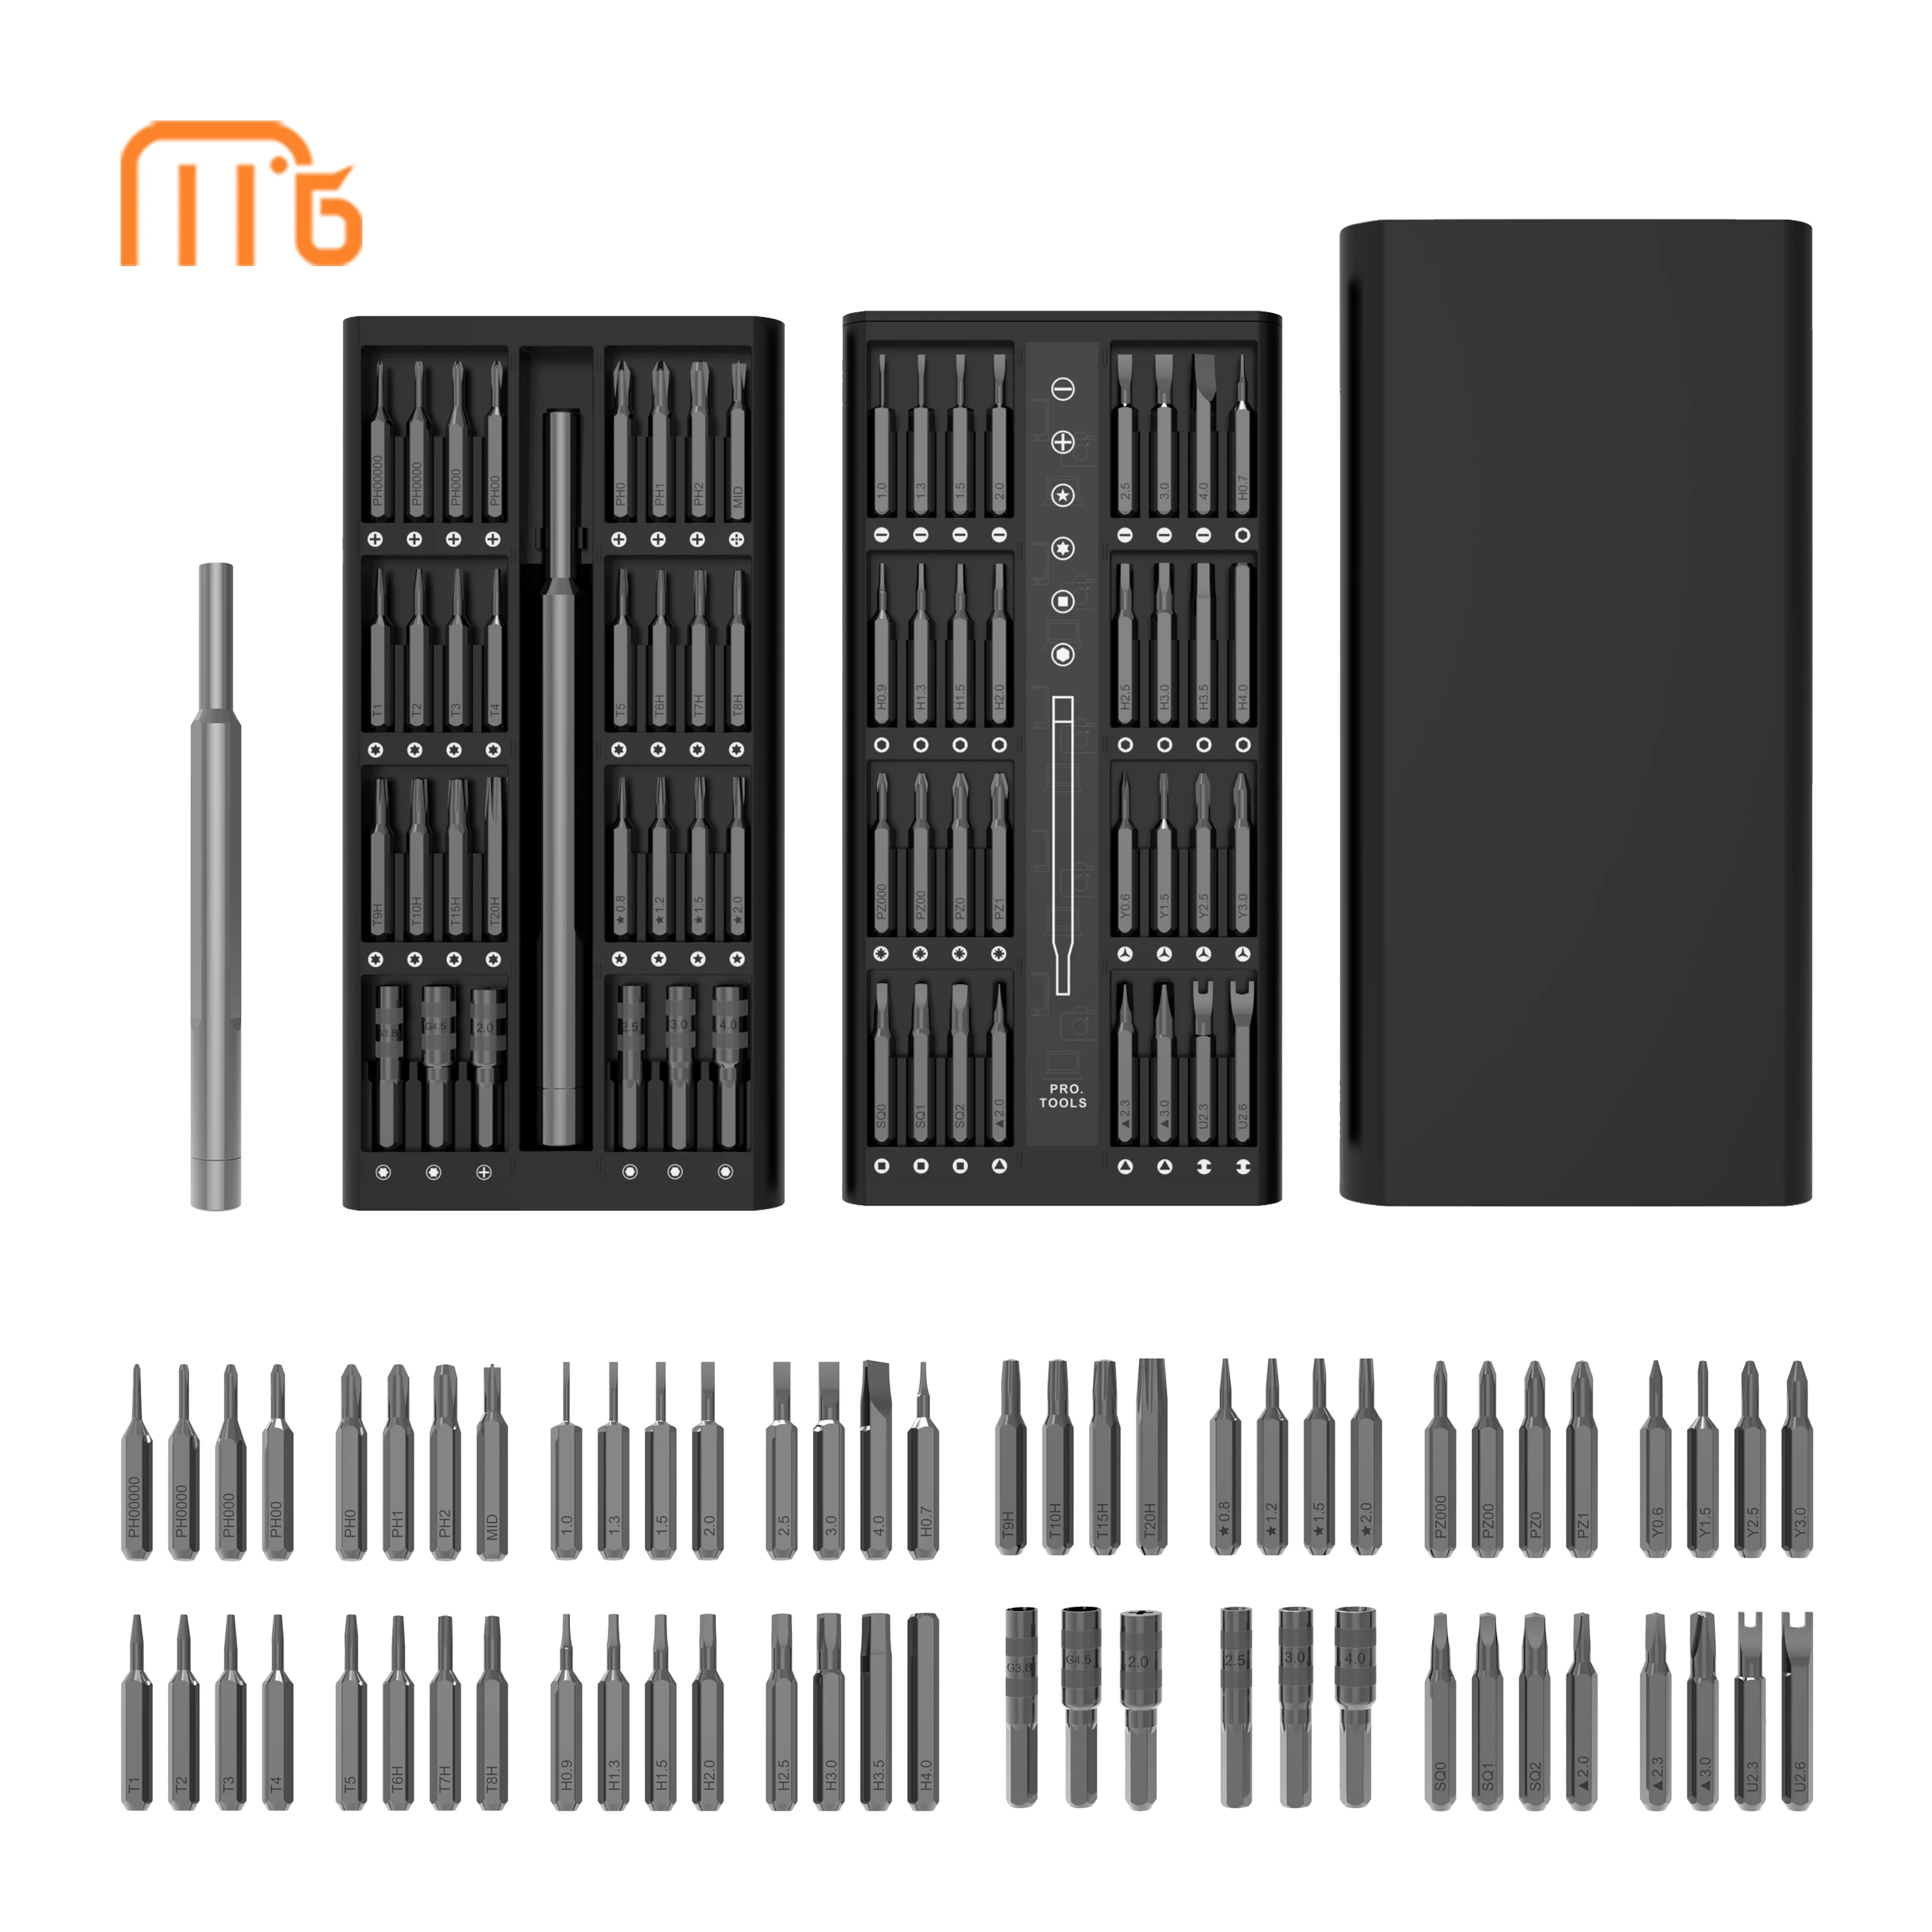 MingTu 63 in 1 Precision Screwdriver Set Compatible for Computer  Laptop PC iPhone iPad MacBook Tablet  Cell Phone  Xbox Ps4,